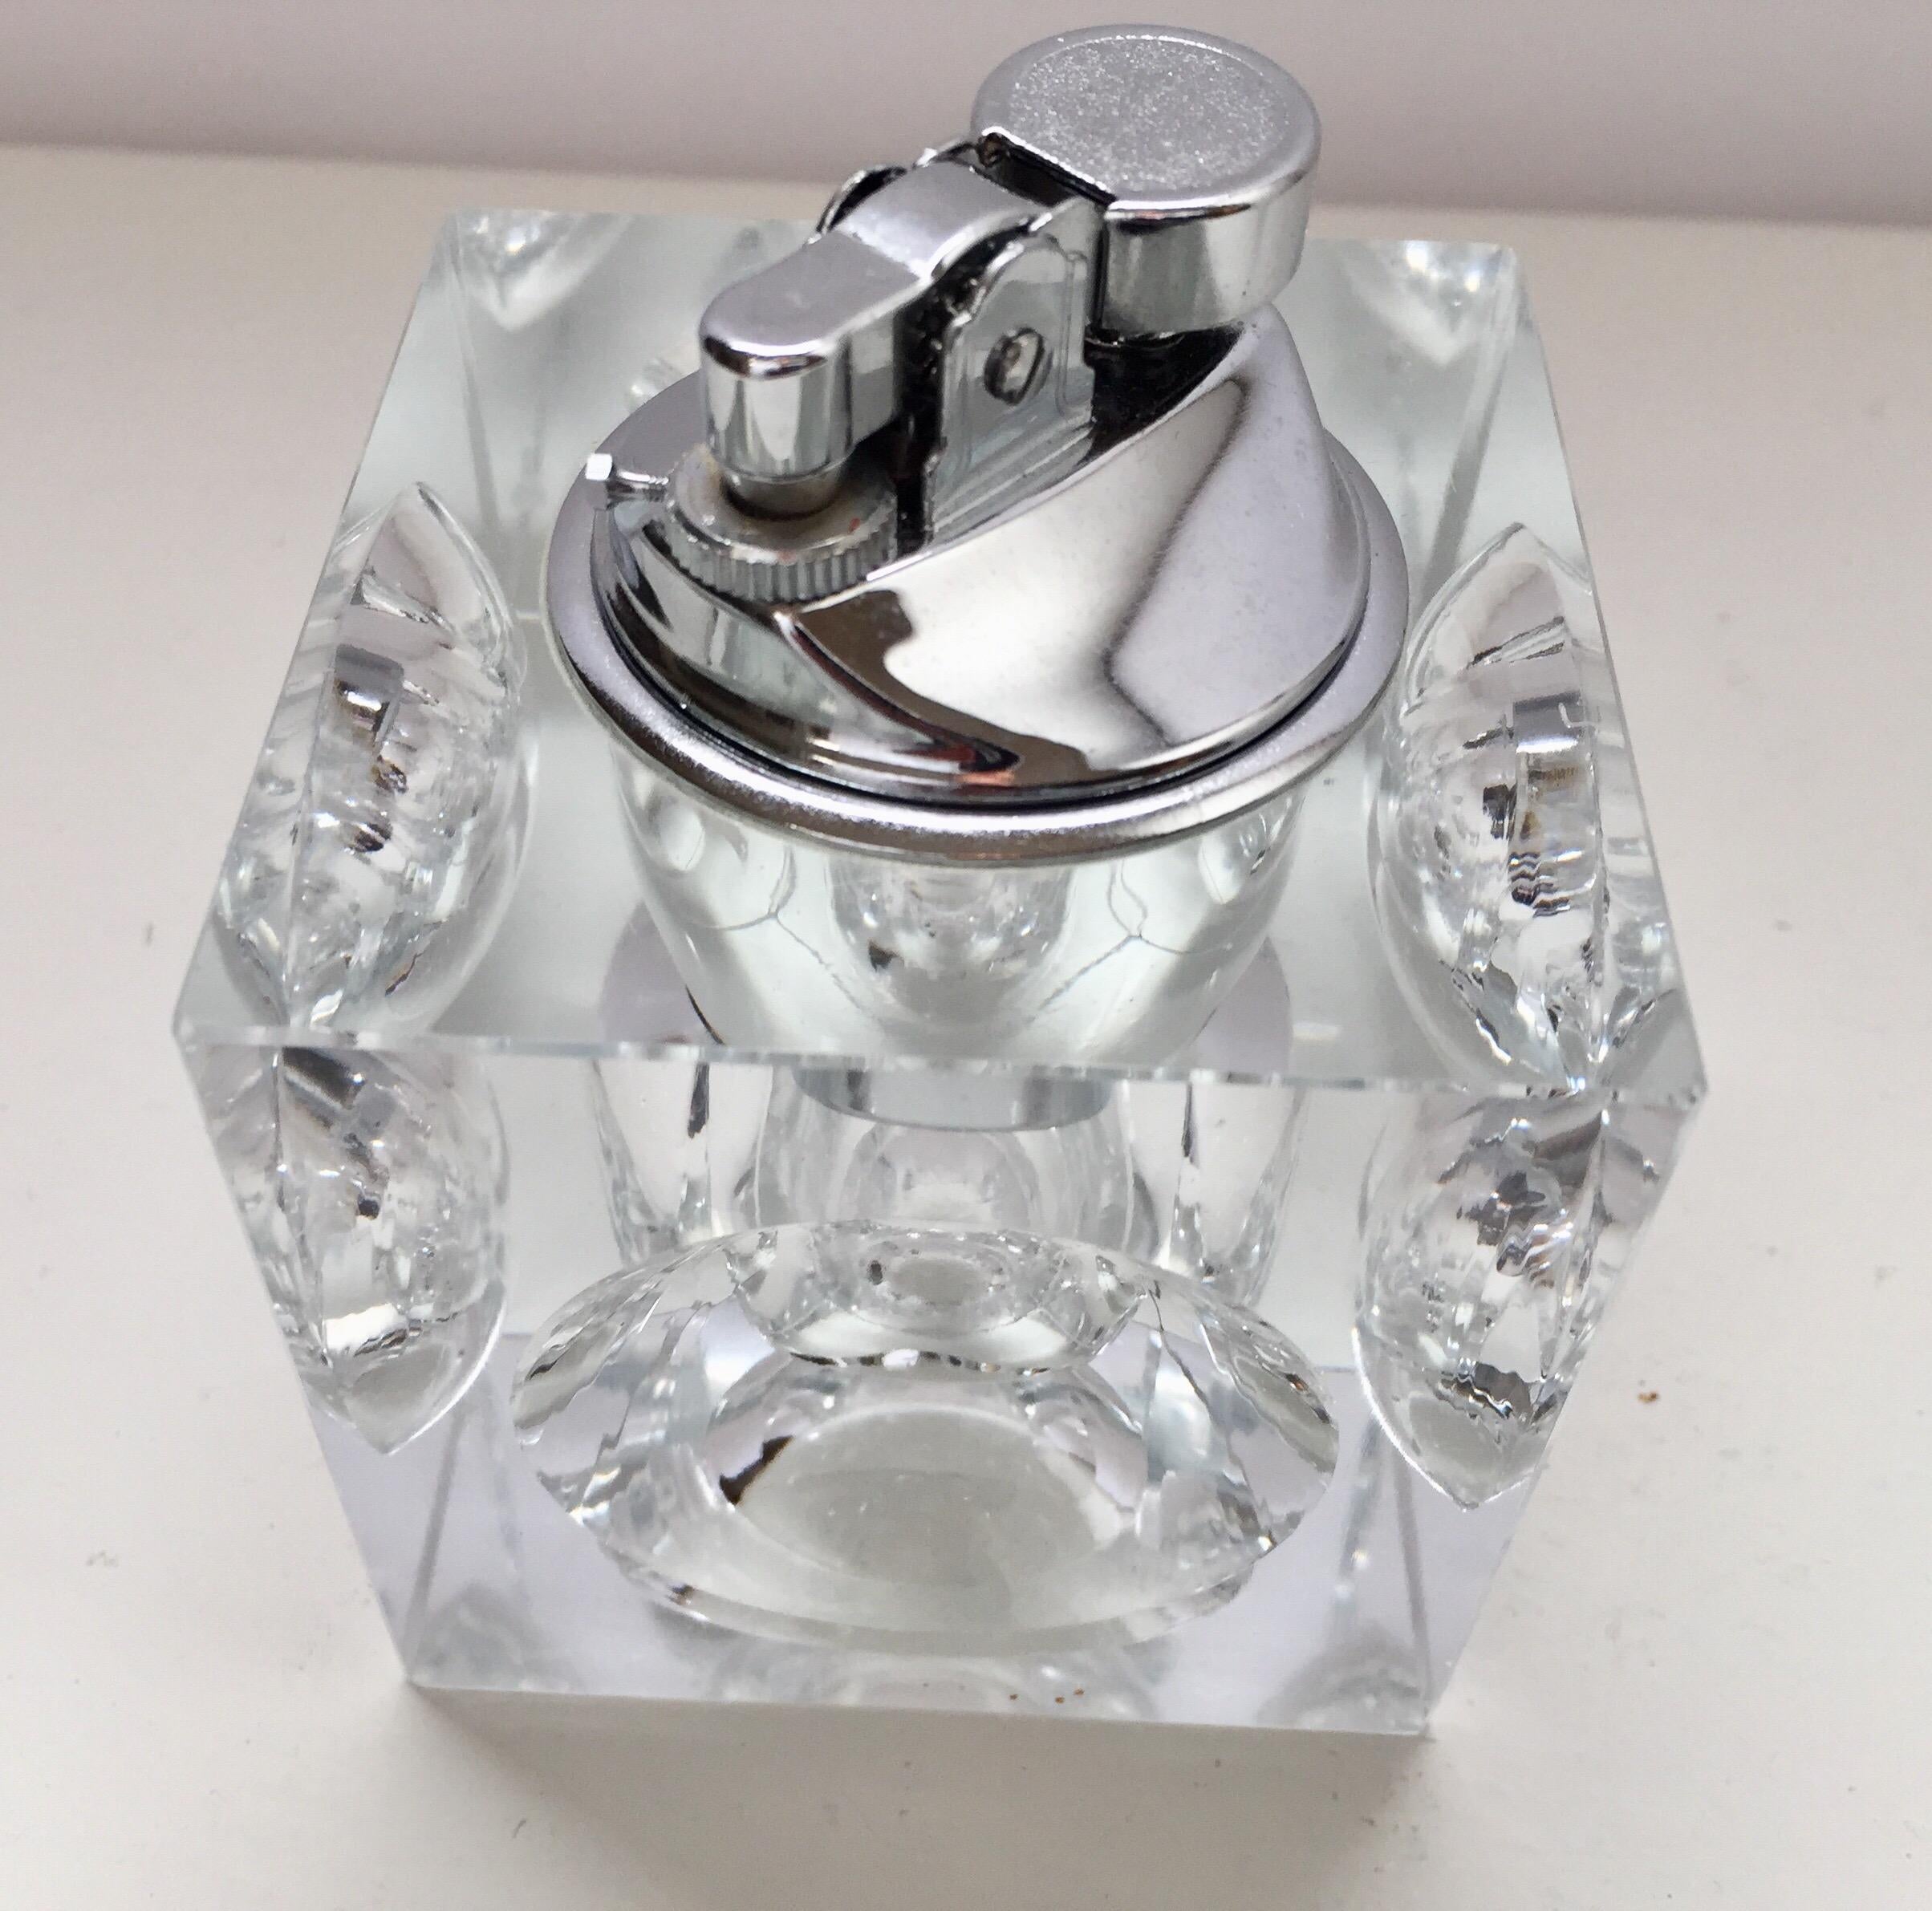 Vintage retro 1970s heavy cut glass cube table lighter-paperweight and ashtray.
Mid-Century Modern retro square glass lighter with circle cut dimples.
A dramatic accent to any modern living room decor, this square lighter and ash tray set will